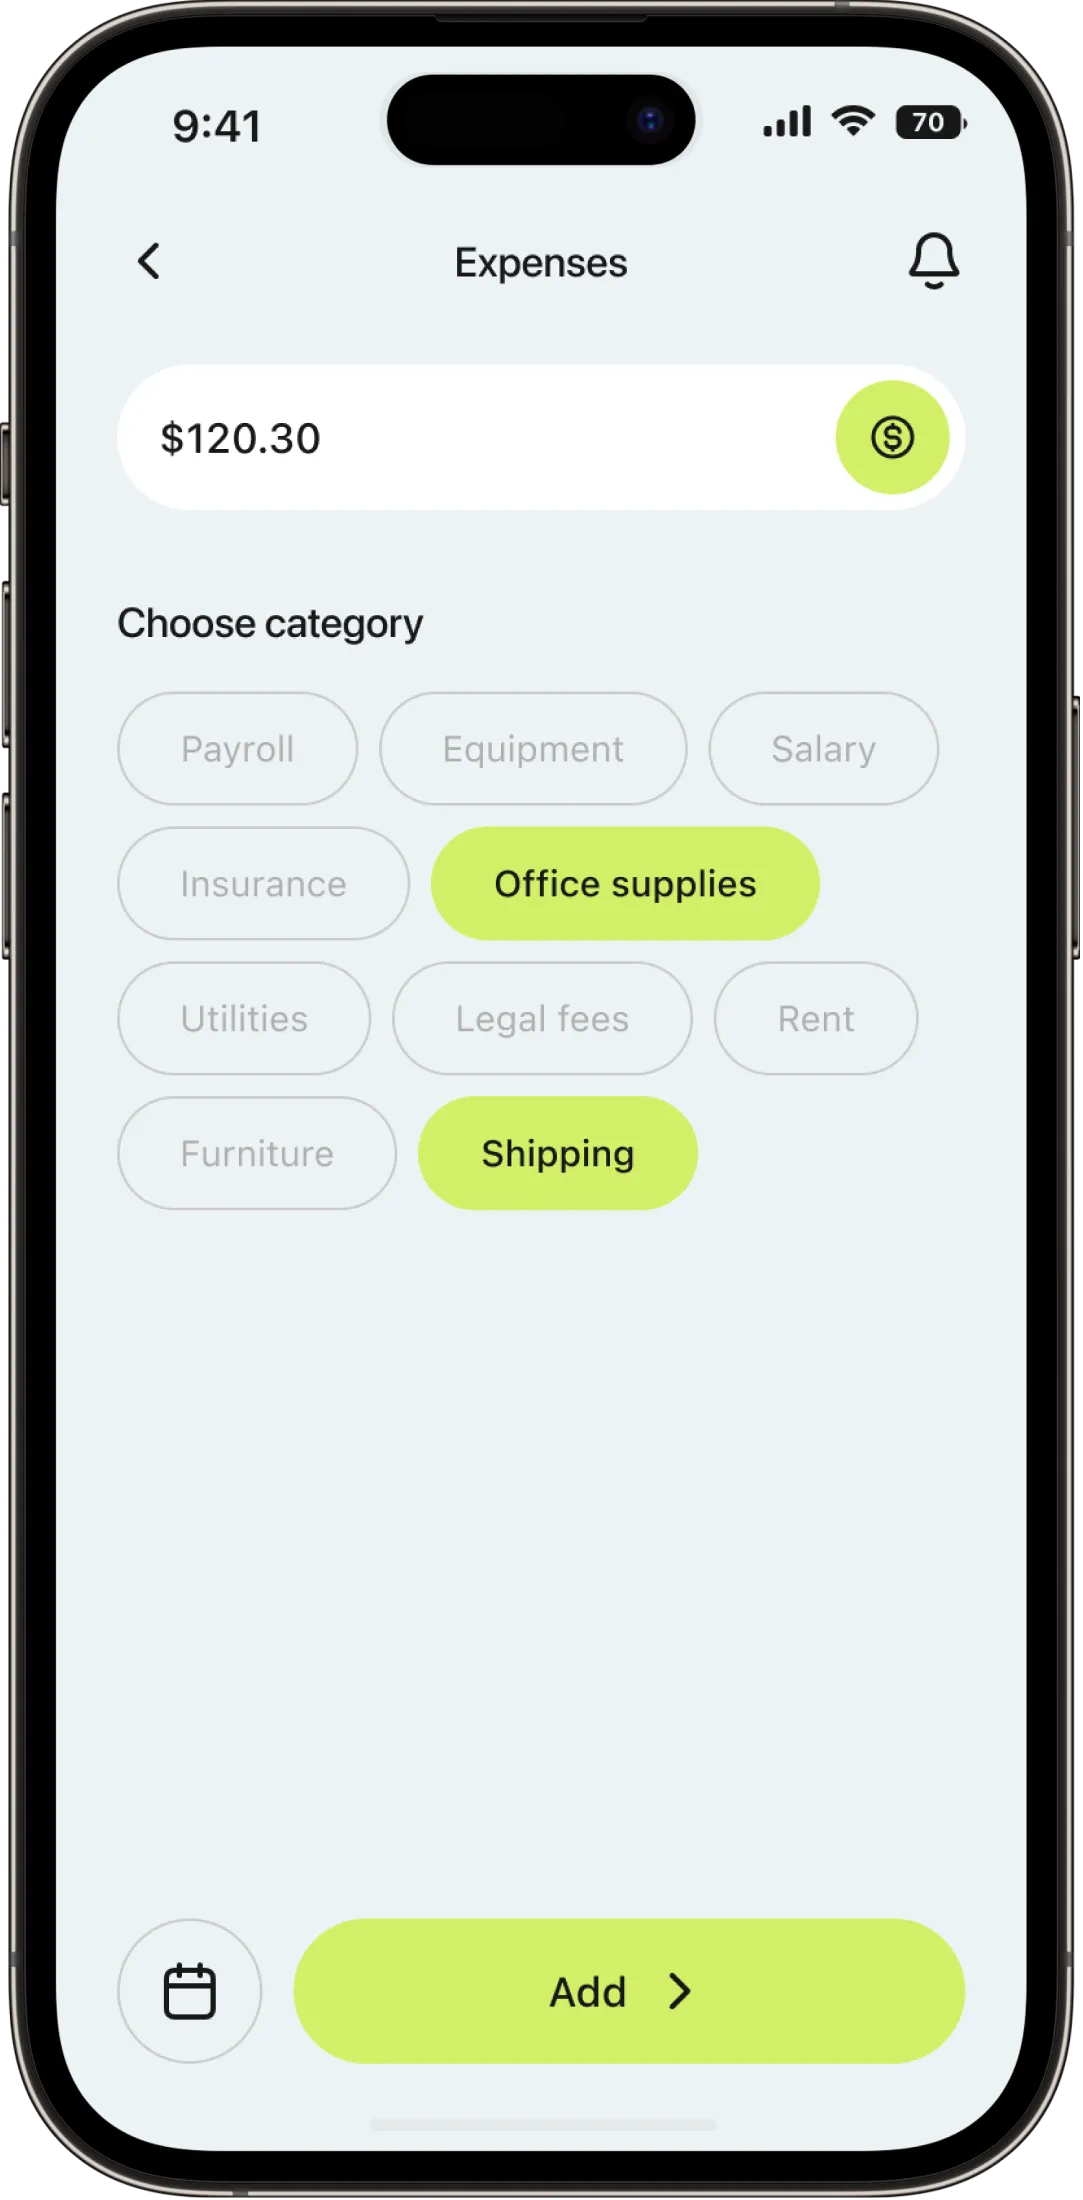 YWS > Works > CaseStudy > Mobile Budgeting  App > Expenses and income > Image